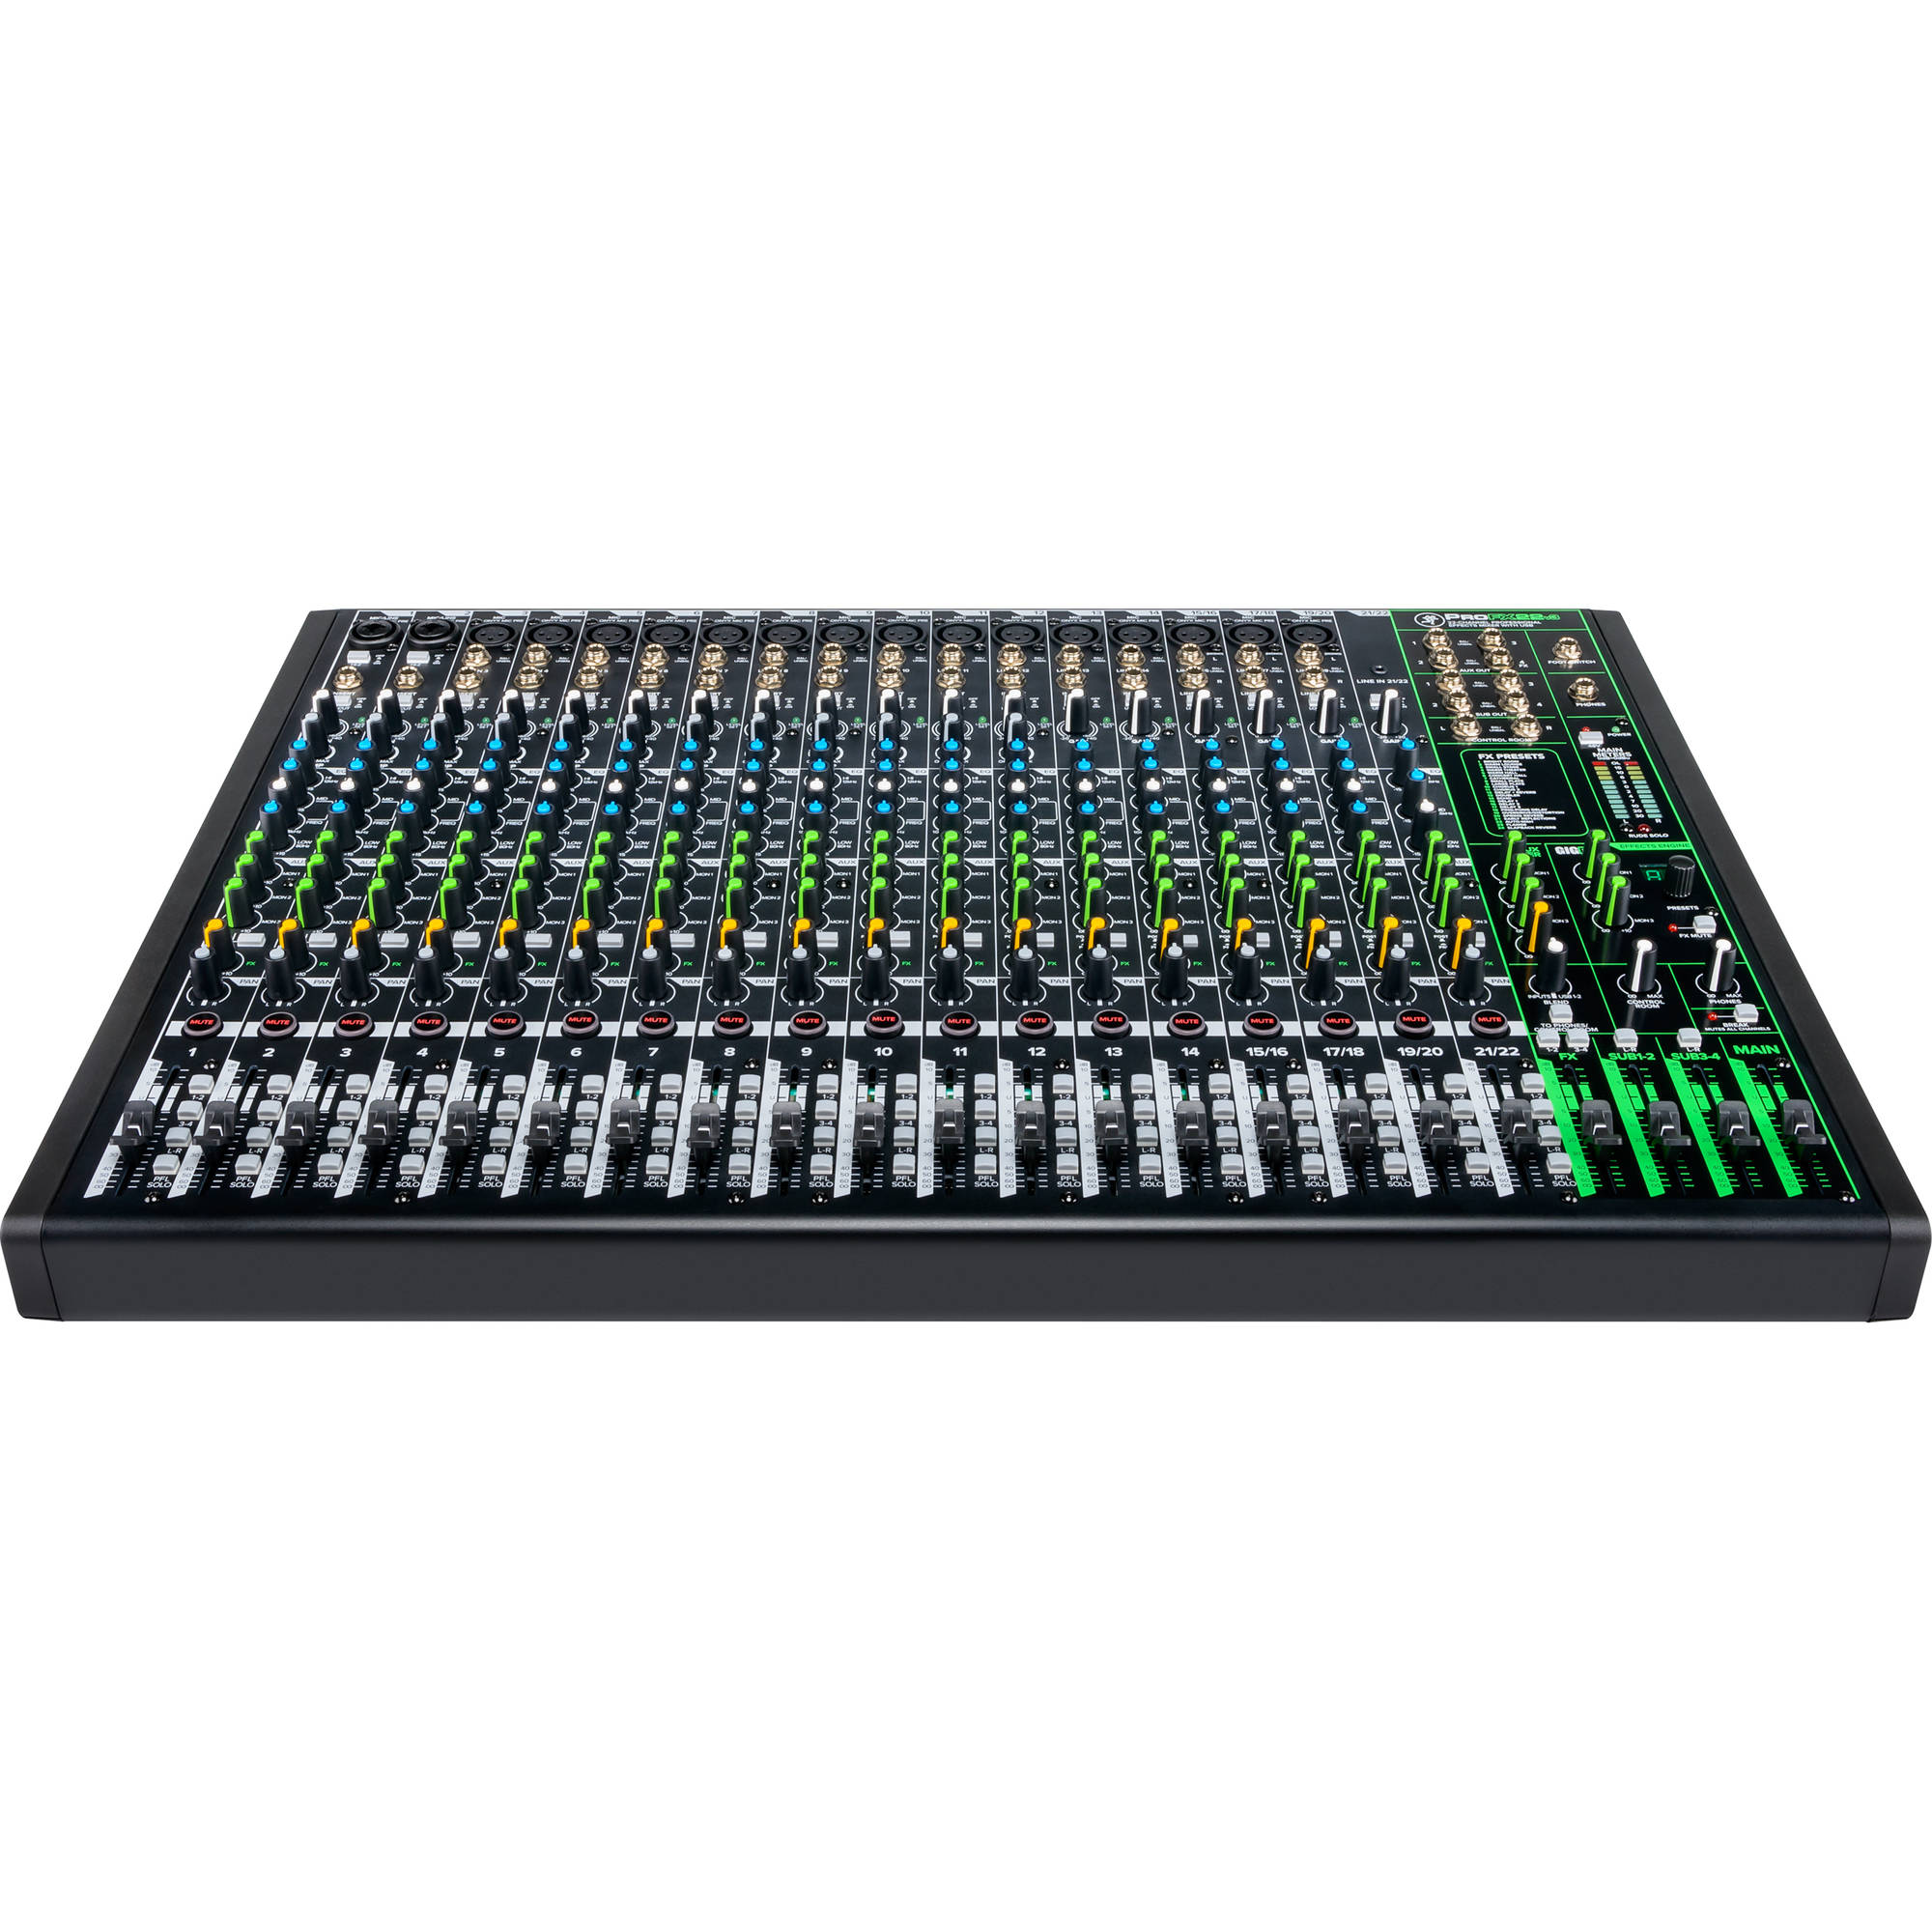 Mackie ProFX22v3 22-Channel Unpowered Effects Mixer USB Bundle with Waveform OEM DAW, 4-Year Full Coverage Extended Warranty, 2x Cable Ties and Microfiber Cloth - image 5 of 6